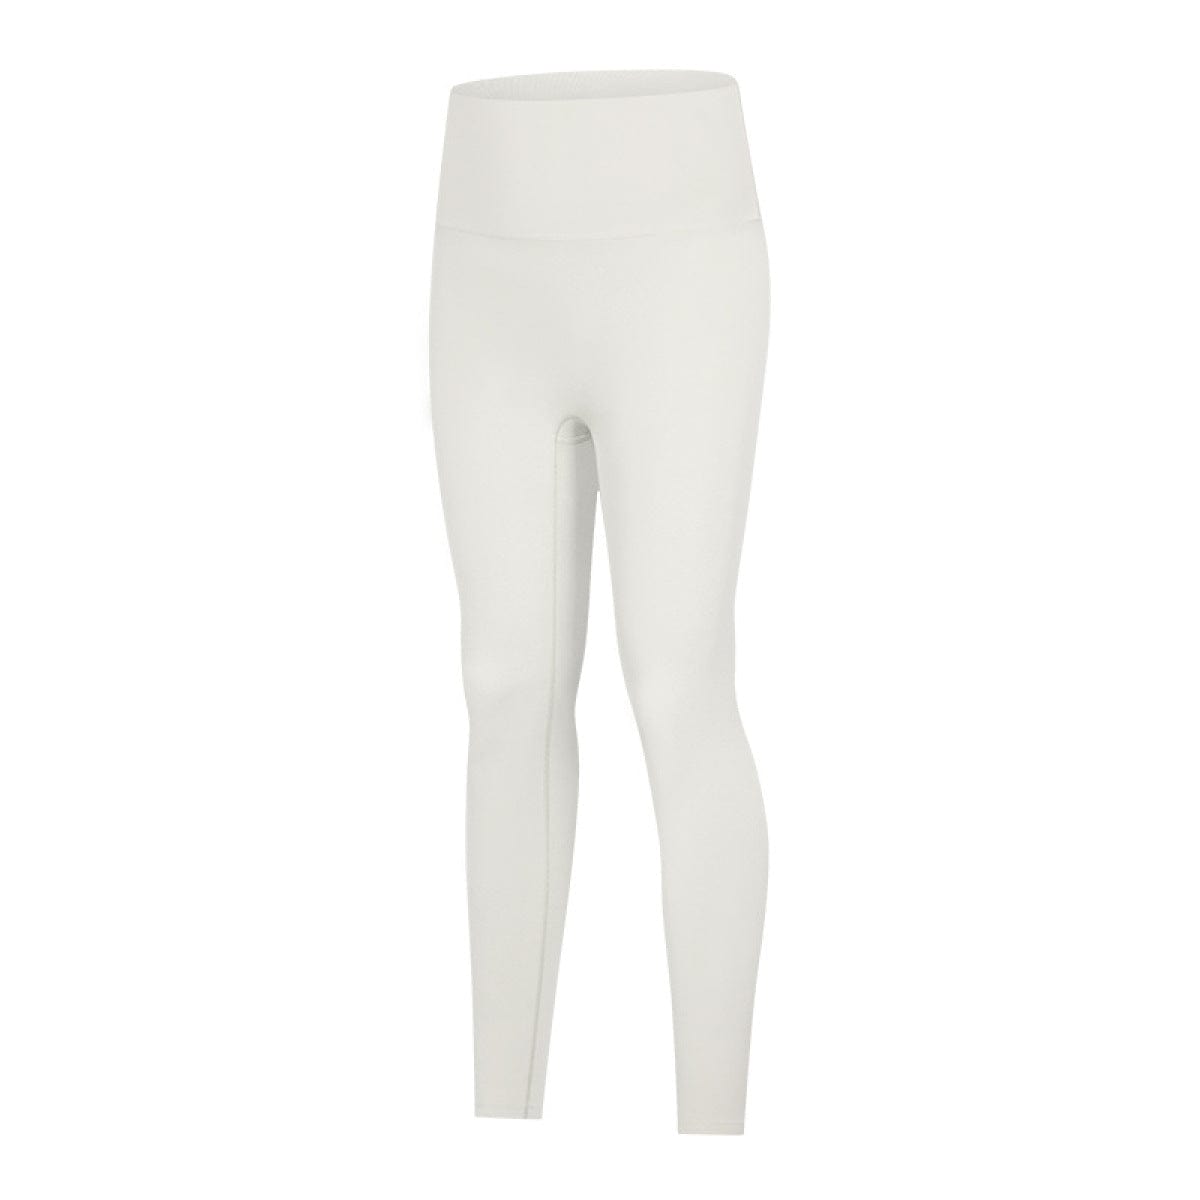 One Size High Waist Butt-Lifting Seamless Leggings White ONE SIZE